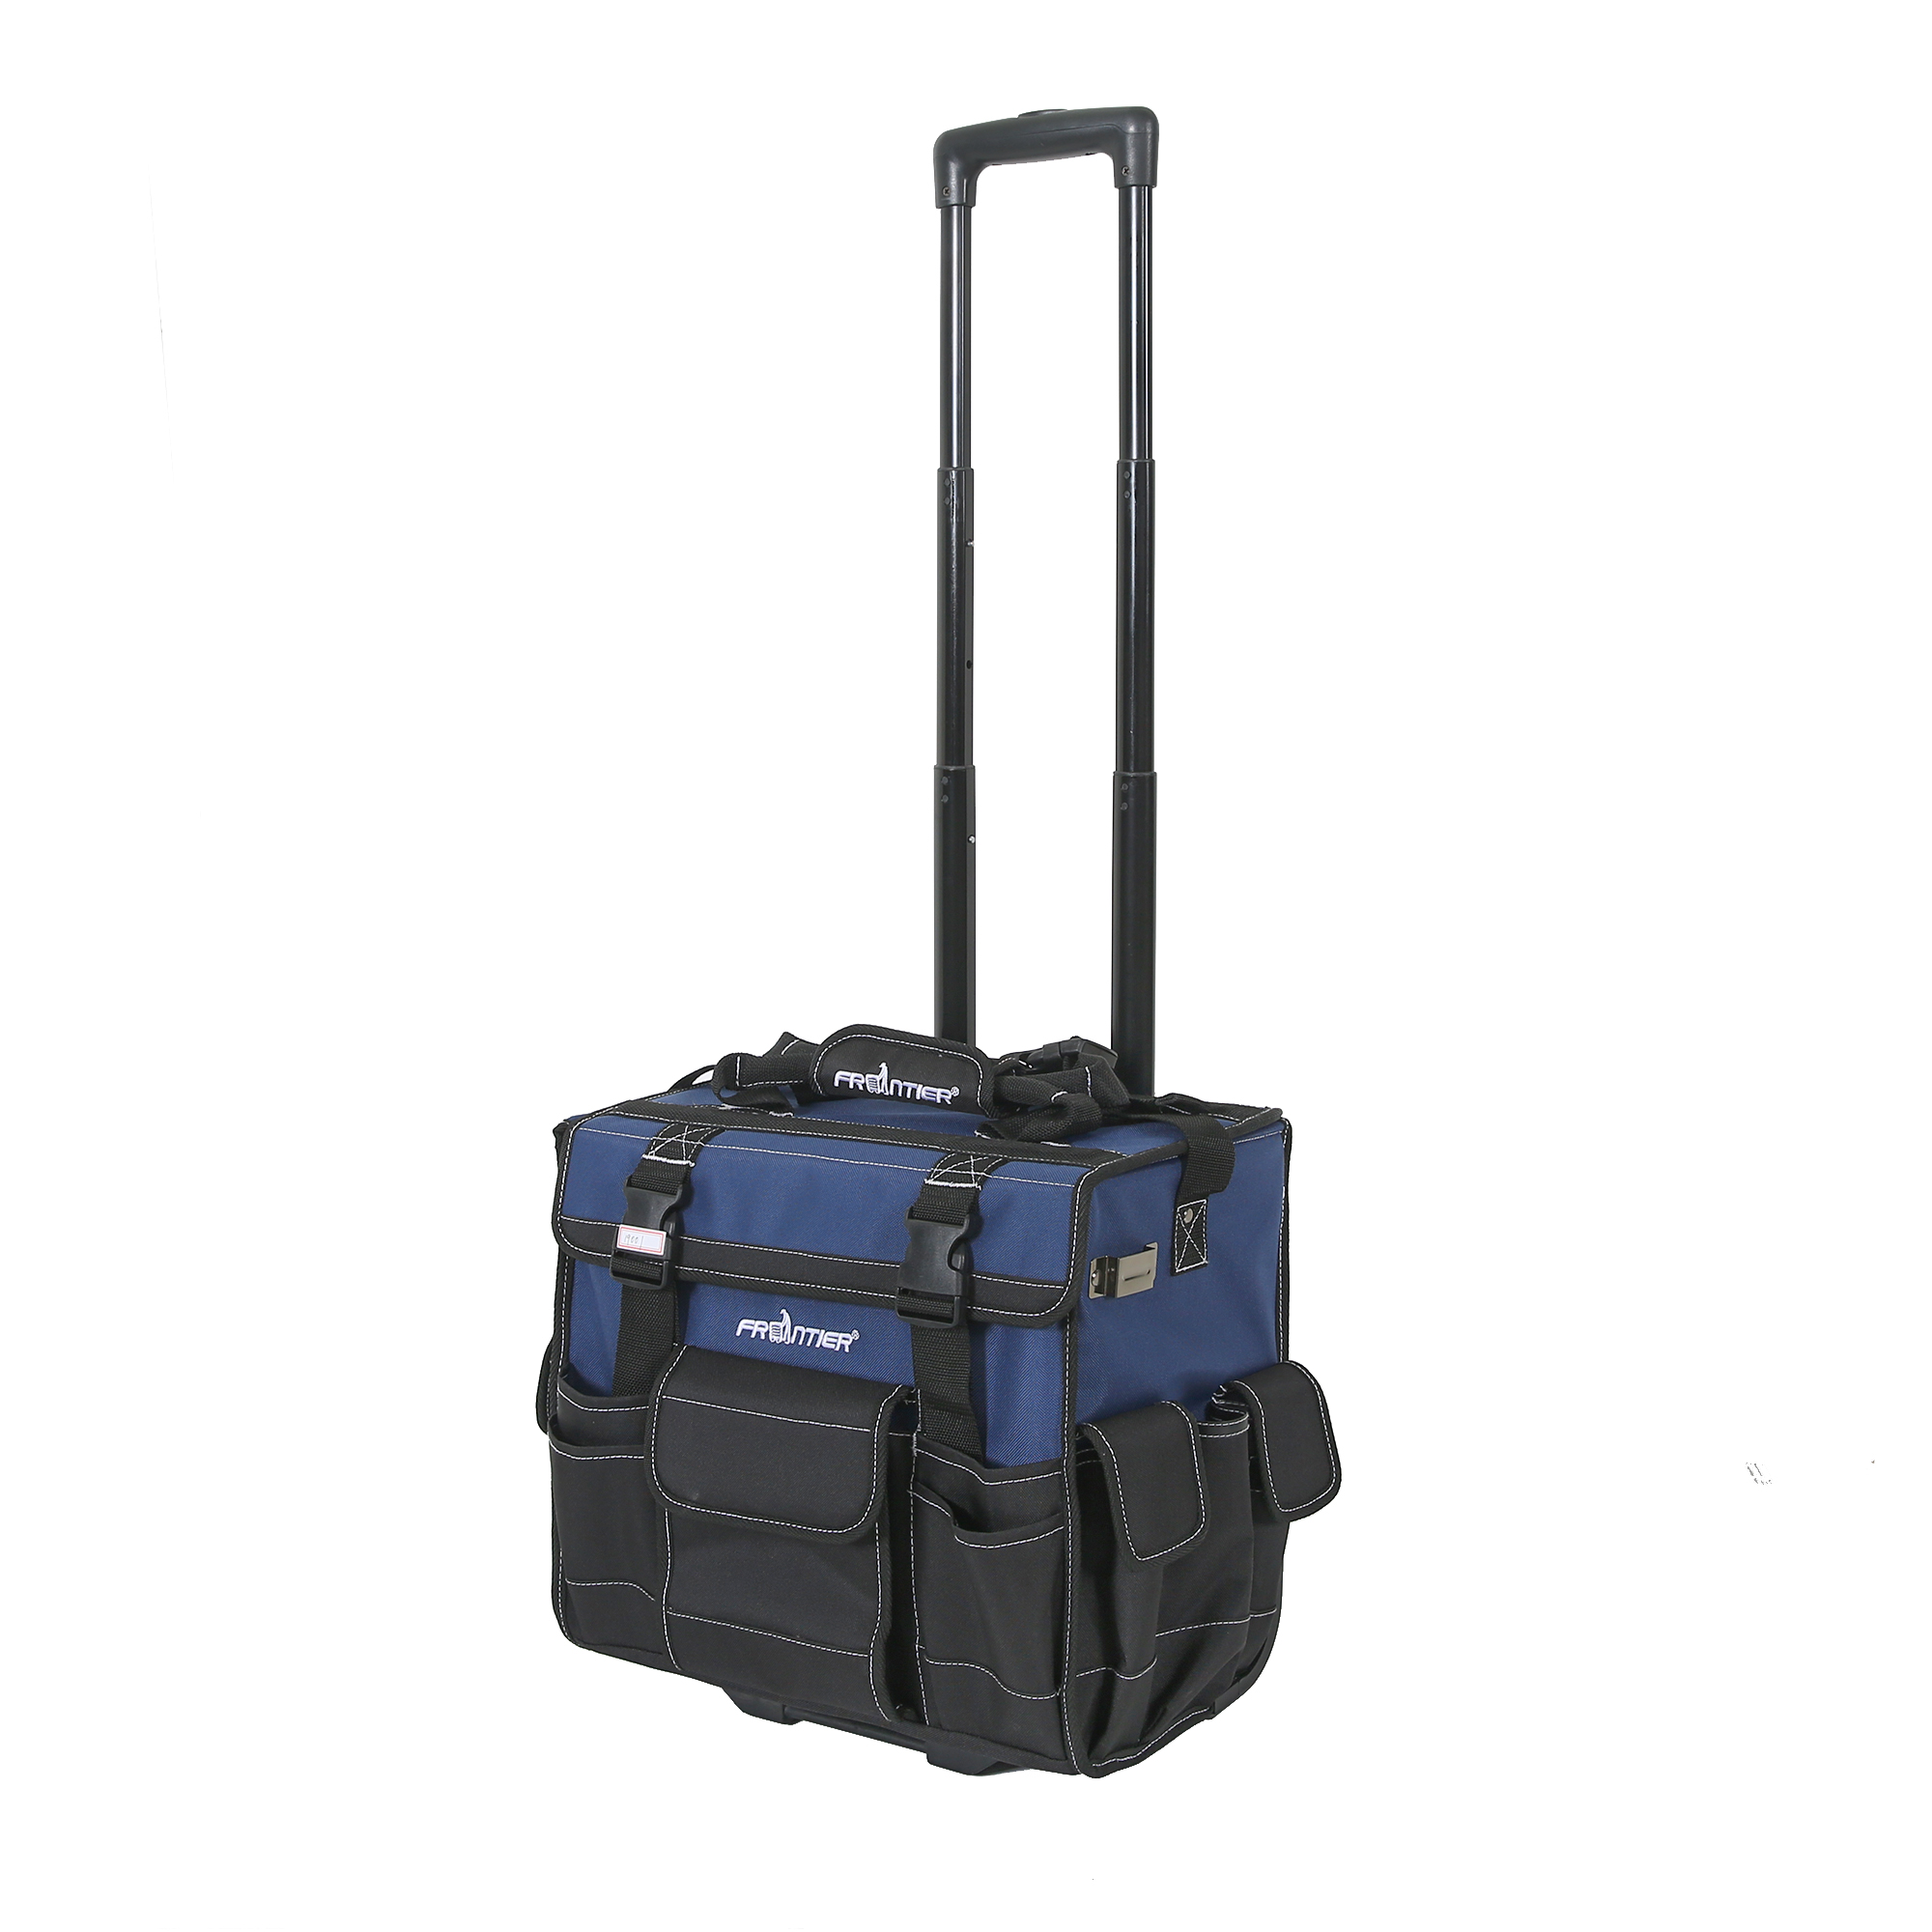 15INCH ROLLING TOOL BAG